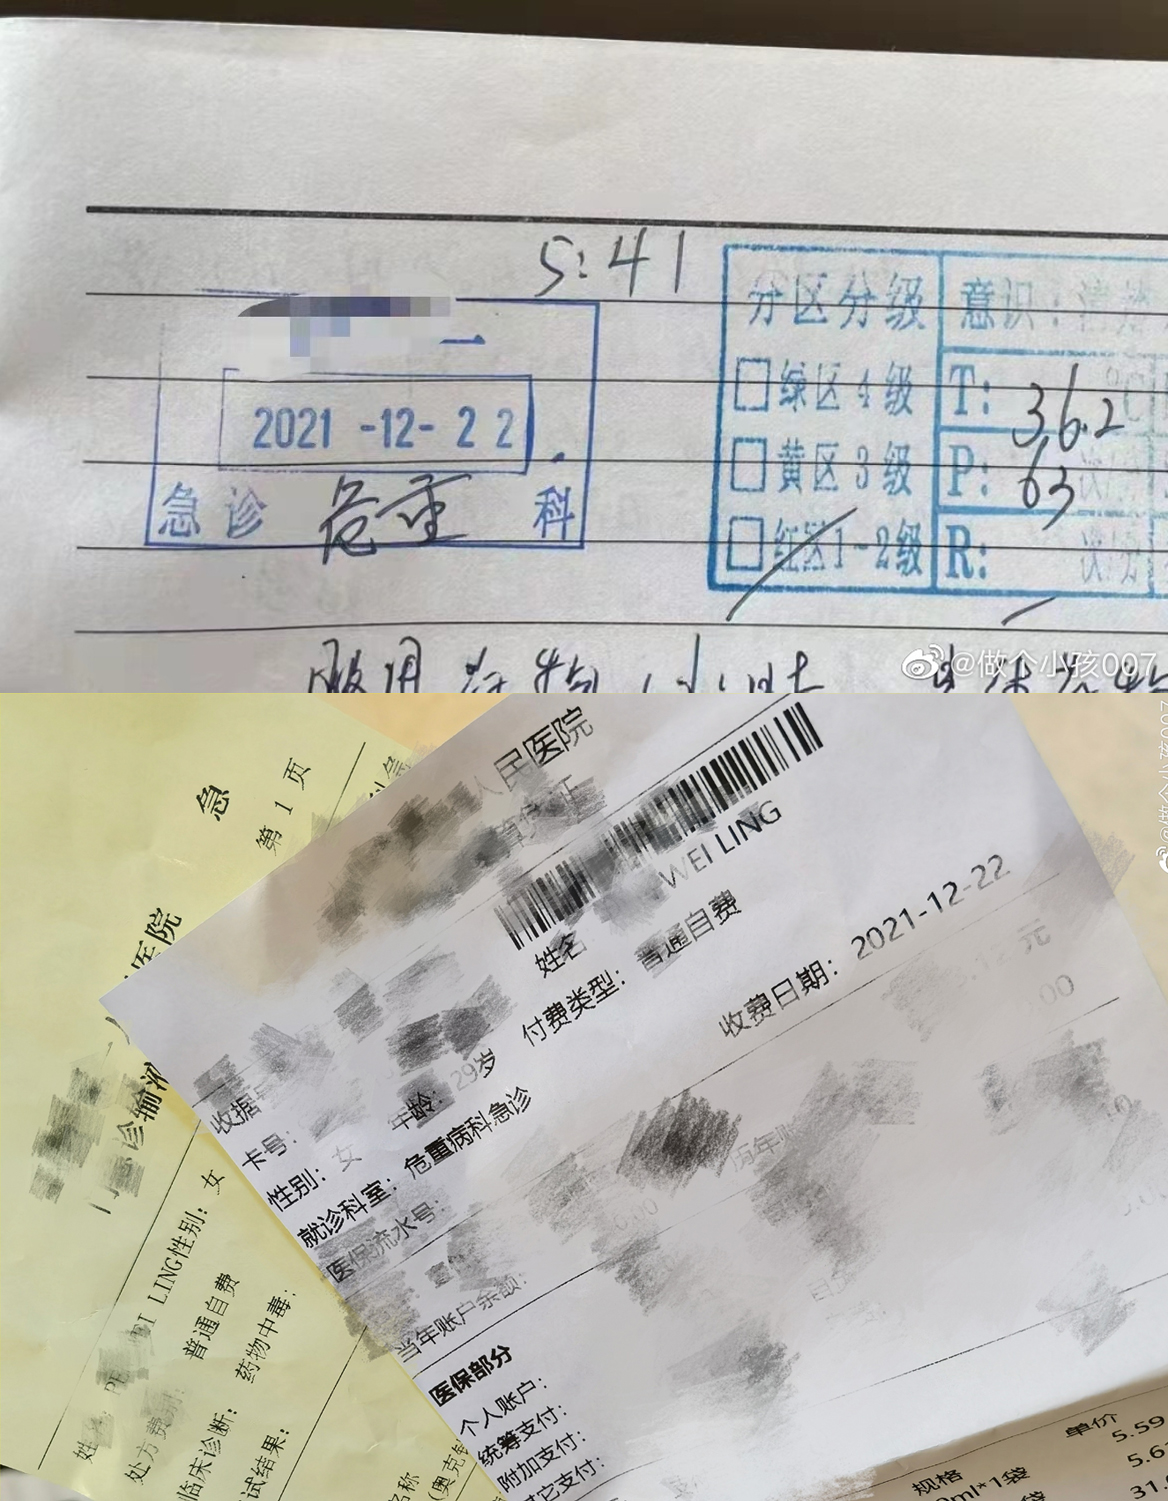 Hospital documents showing Yumi's birth name were also shared